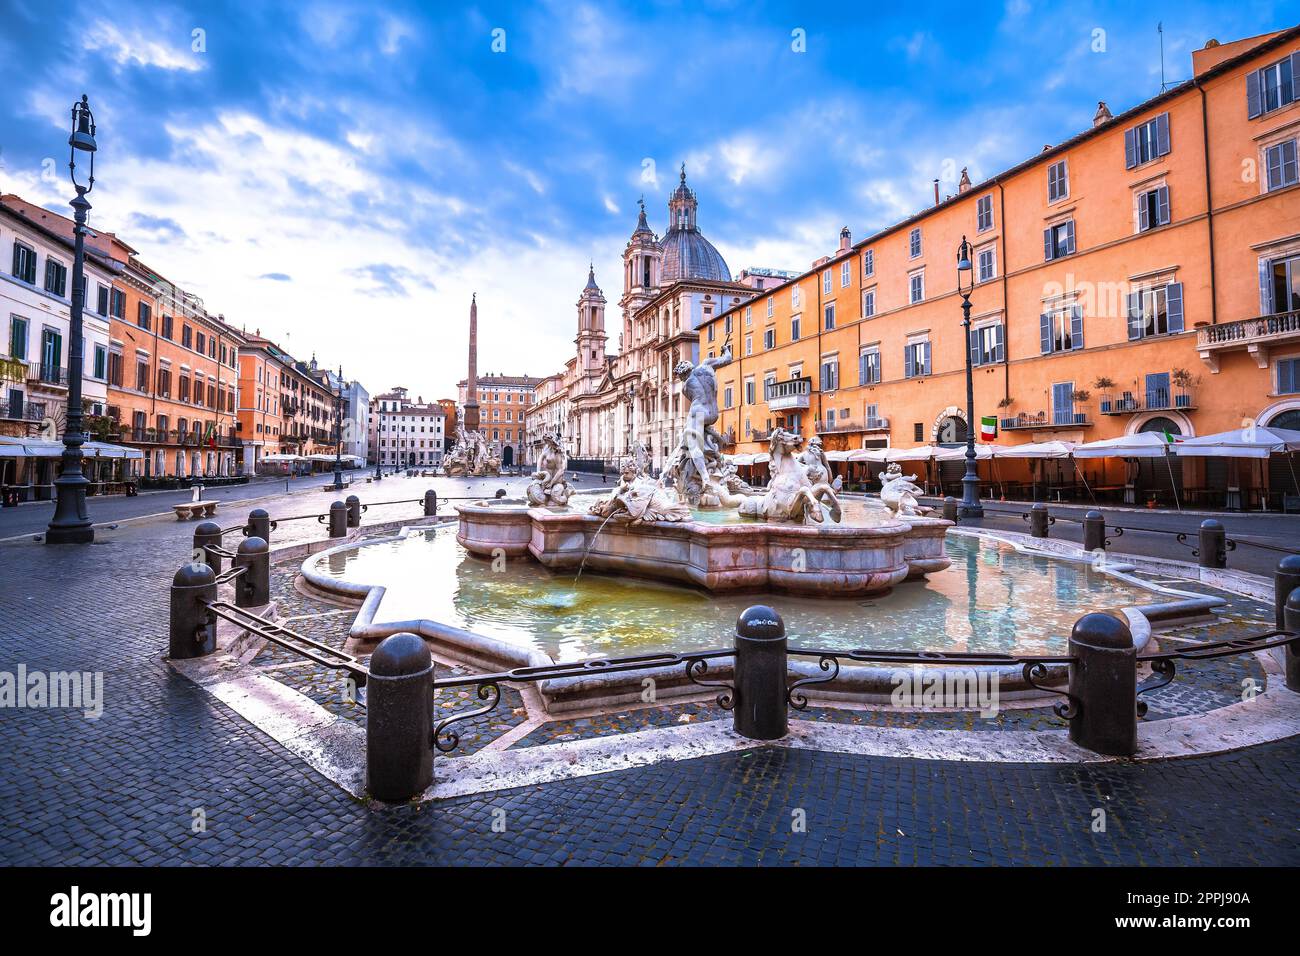 Piazza Navona square fountain and church view Stock Photo